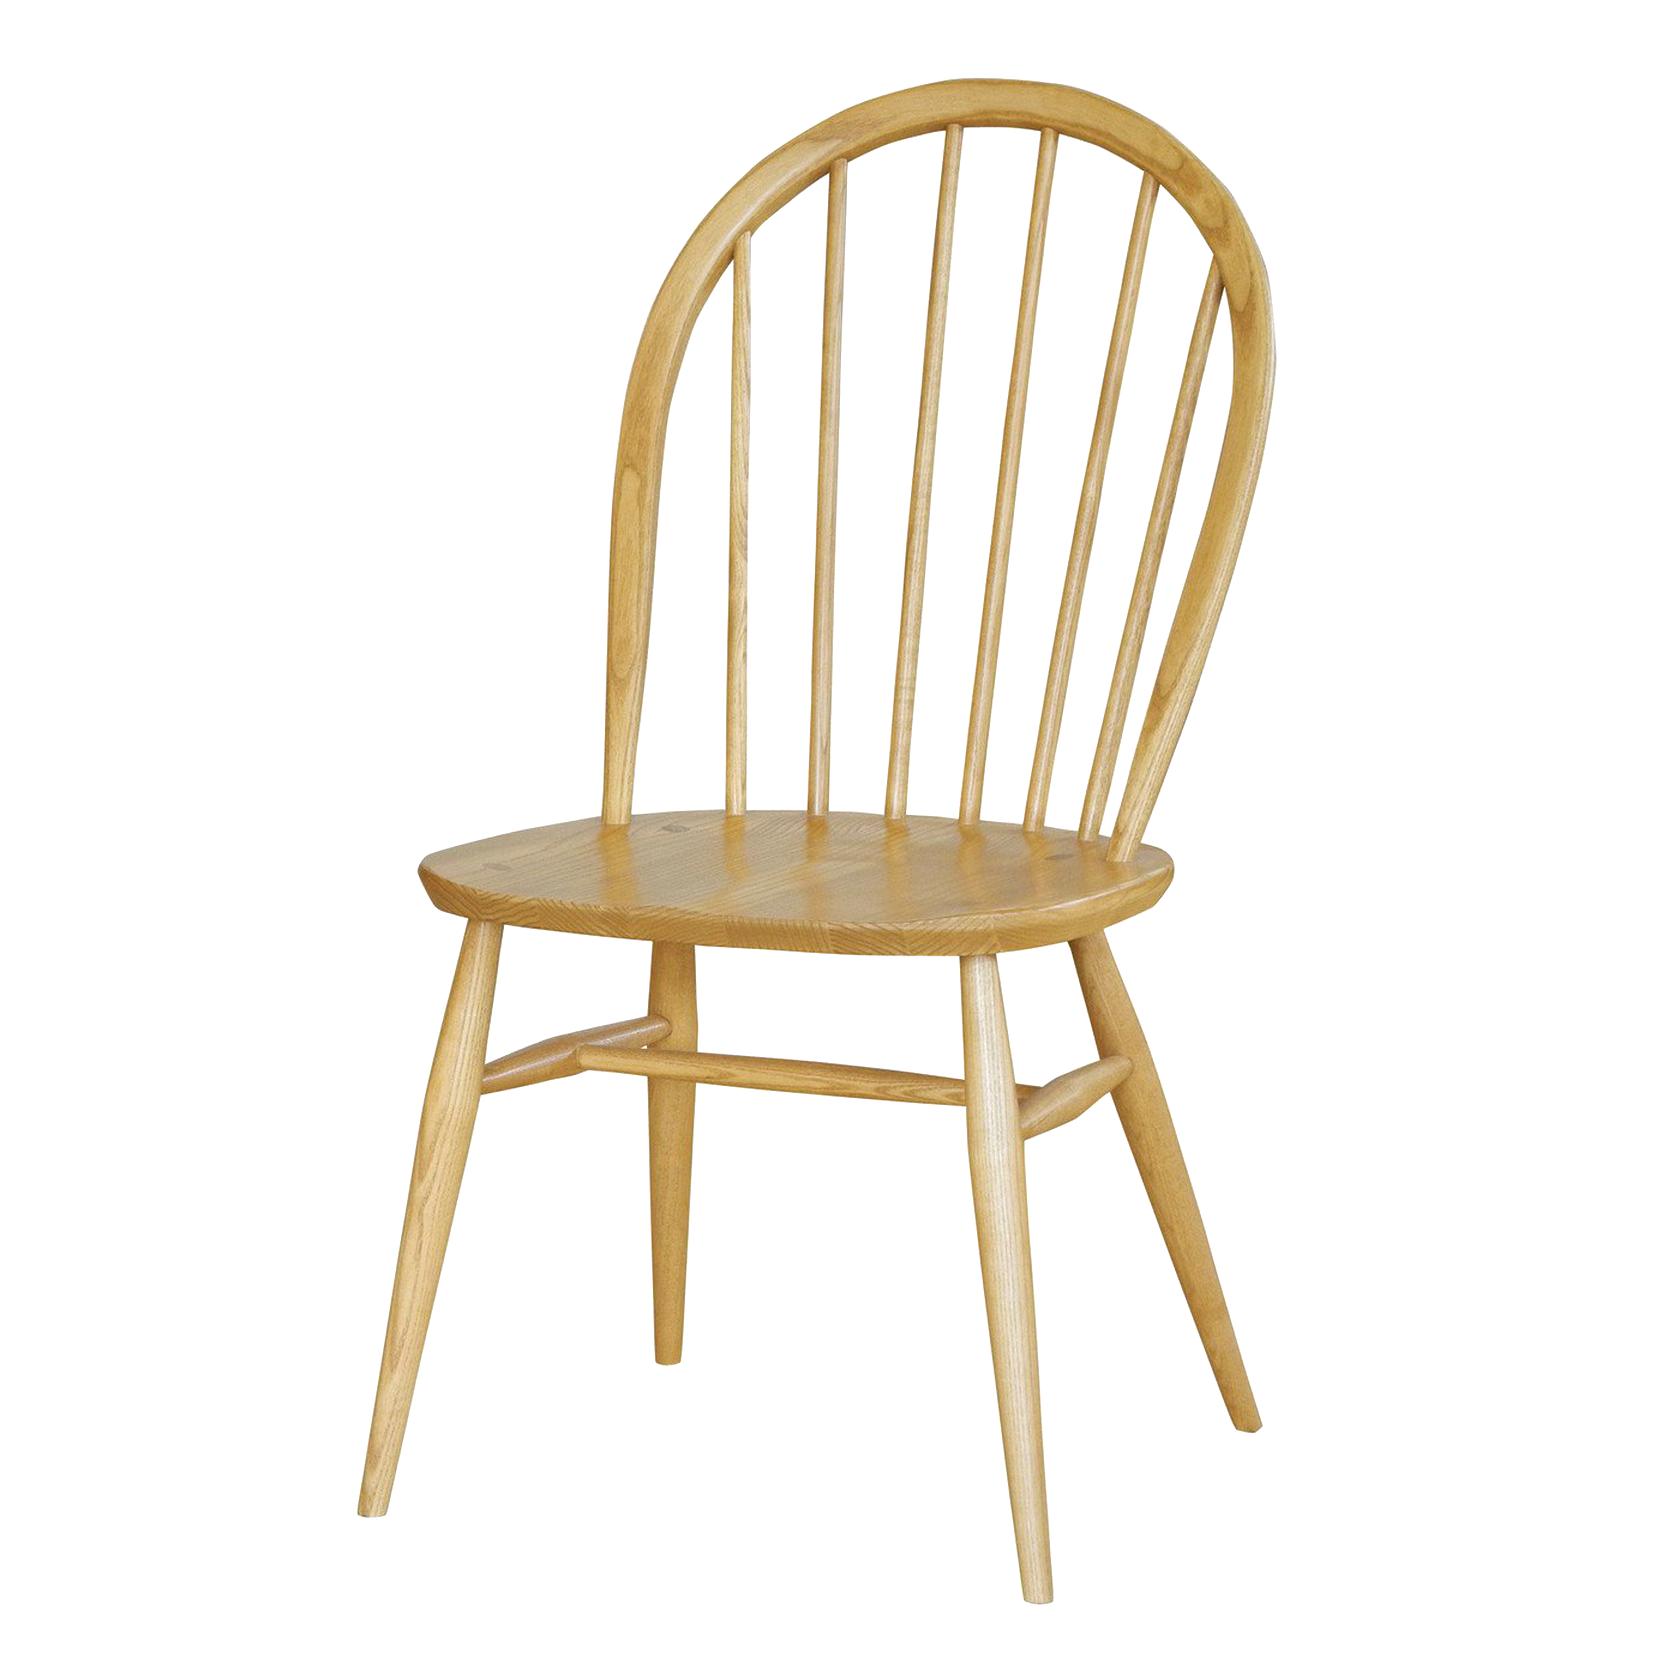 Ercol Windsor Dining Chairs For Sale In Uk View 54 Ads